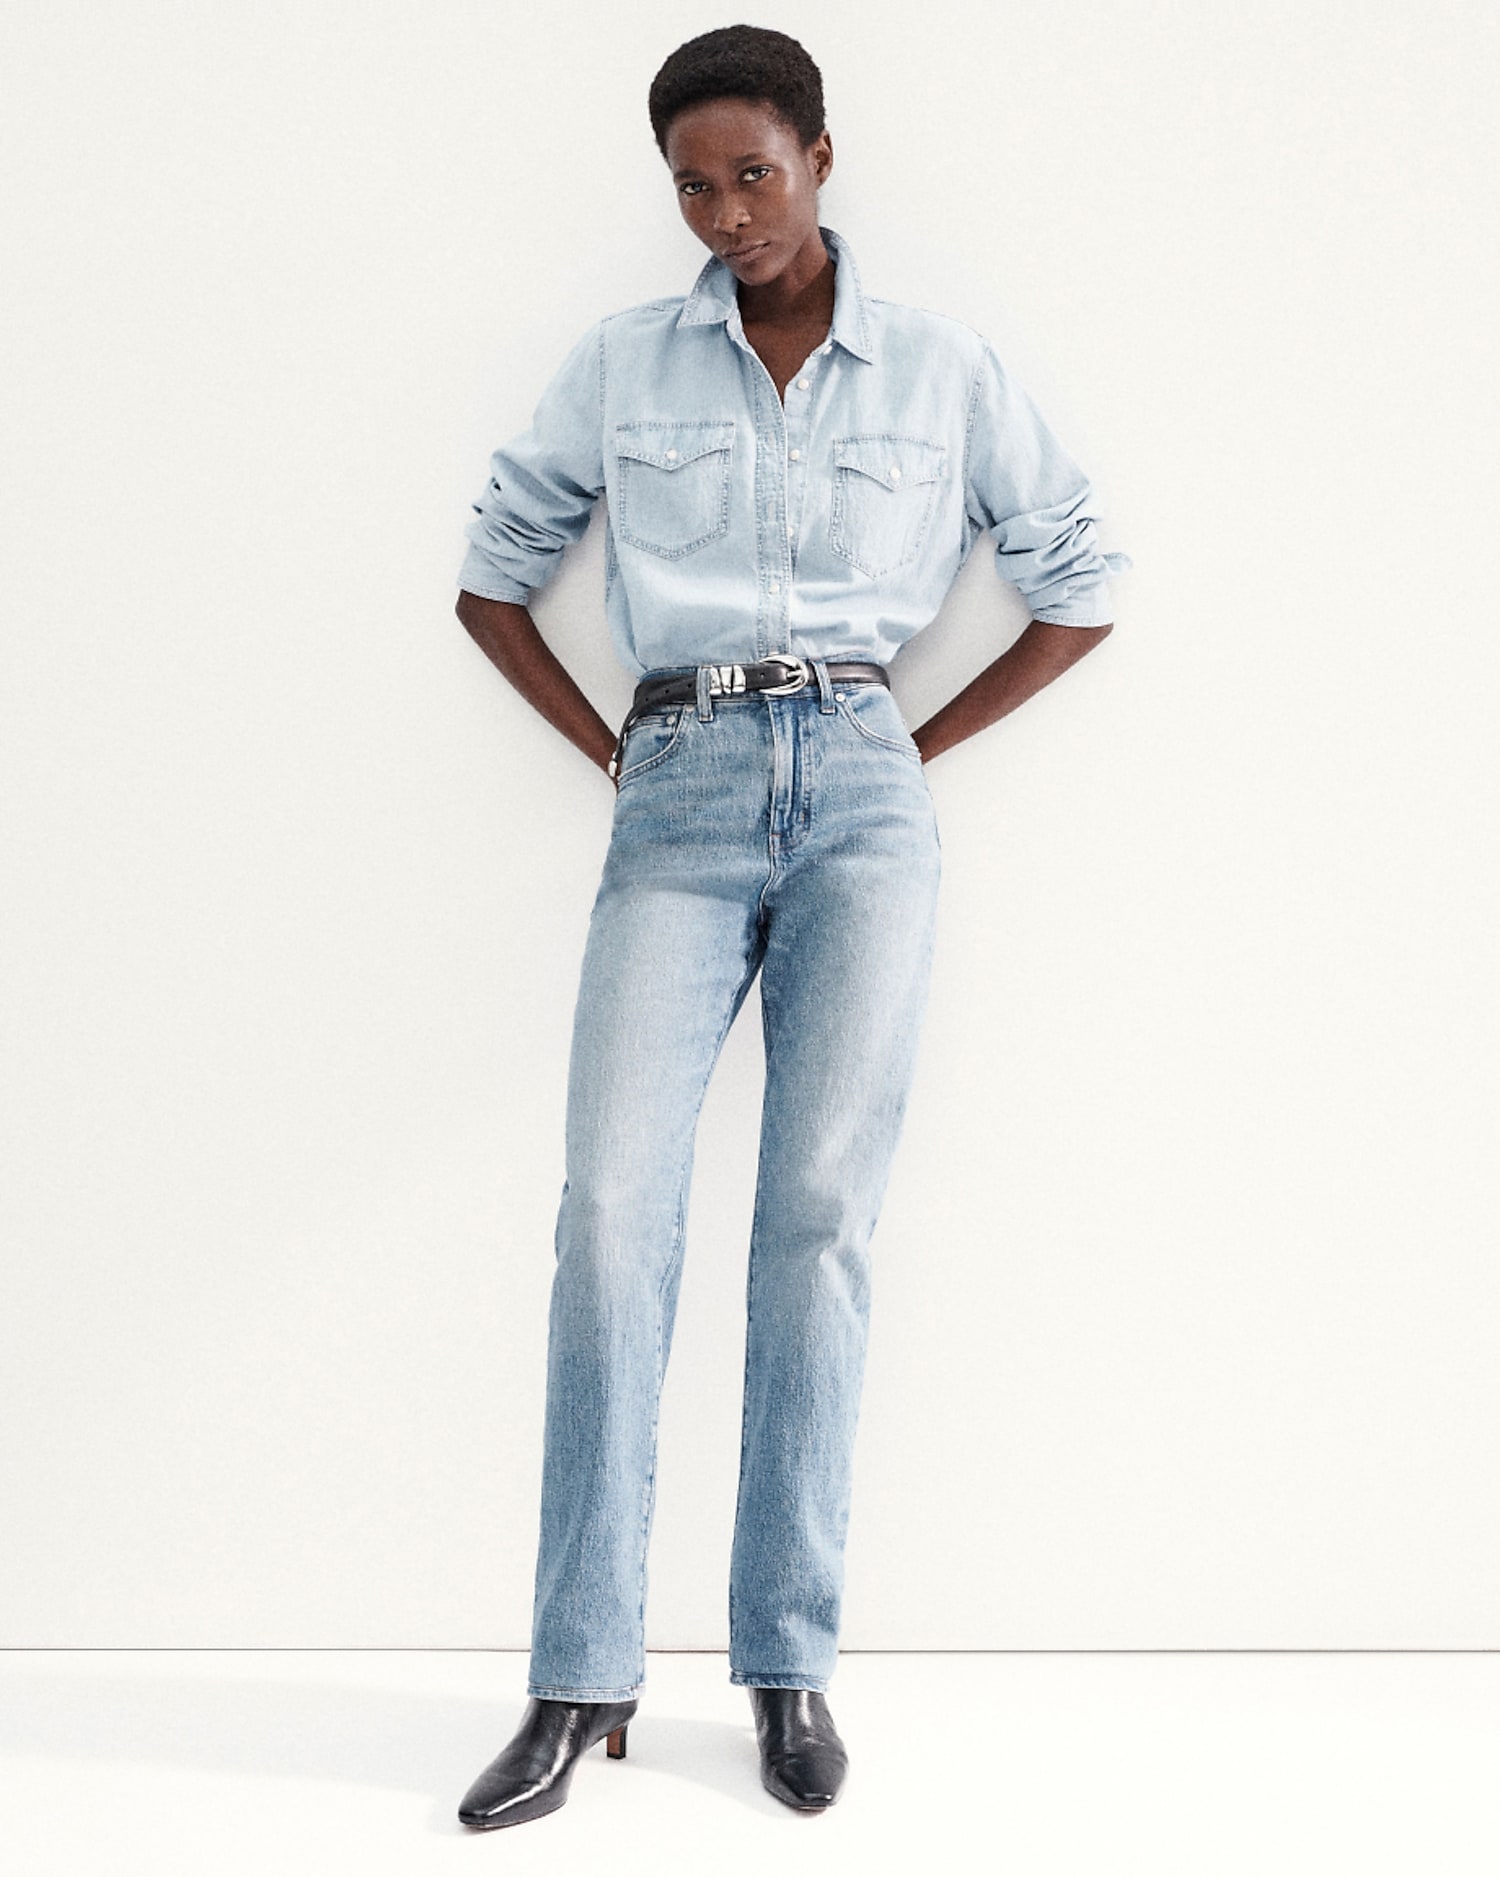 15 Best Places to Buy Jeans 2021: Nordstrom, Levi's, Madewell